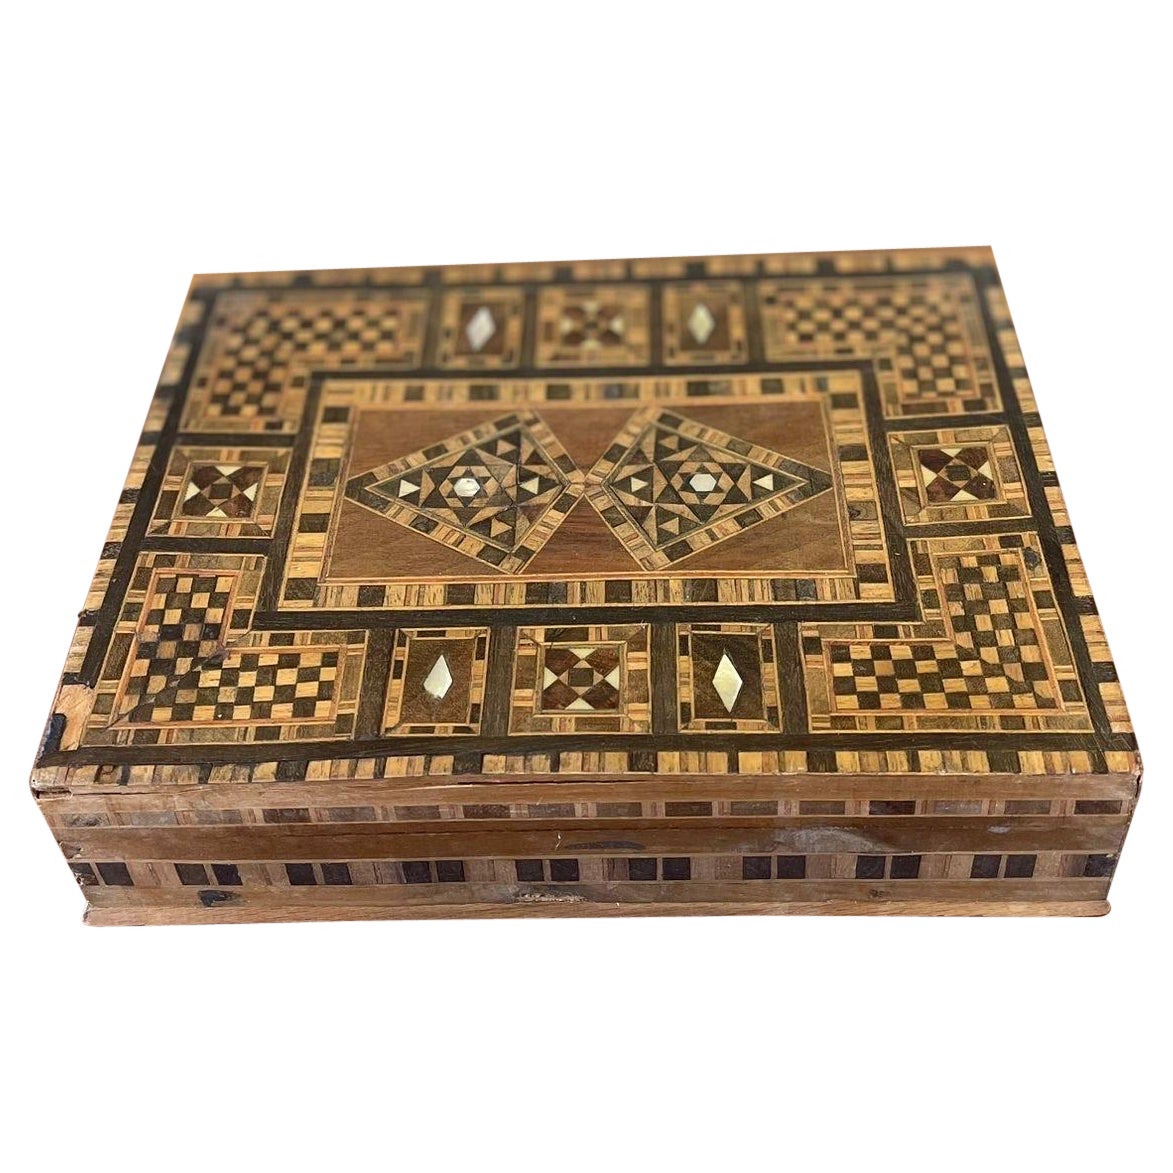 Vintage Wooden Box Inlayed Wooden Mosaic For Sale